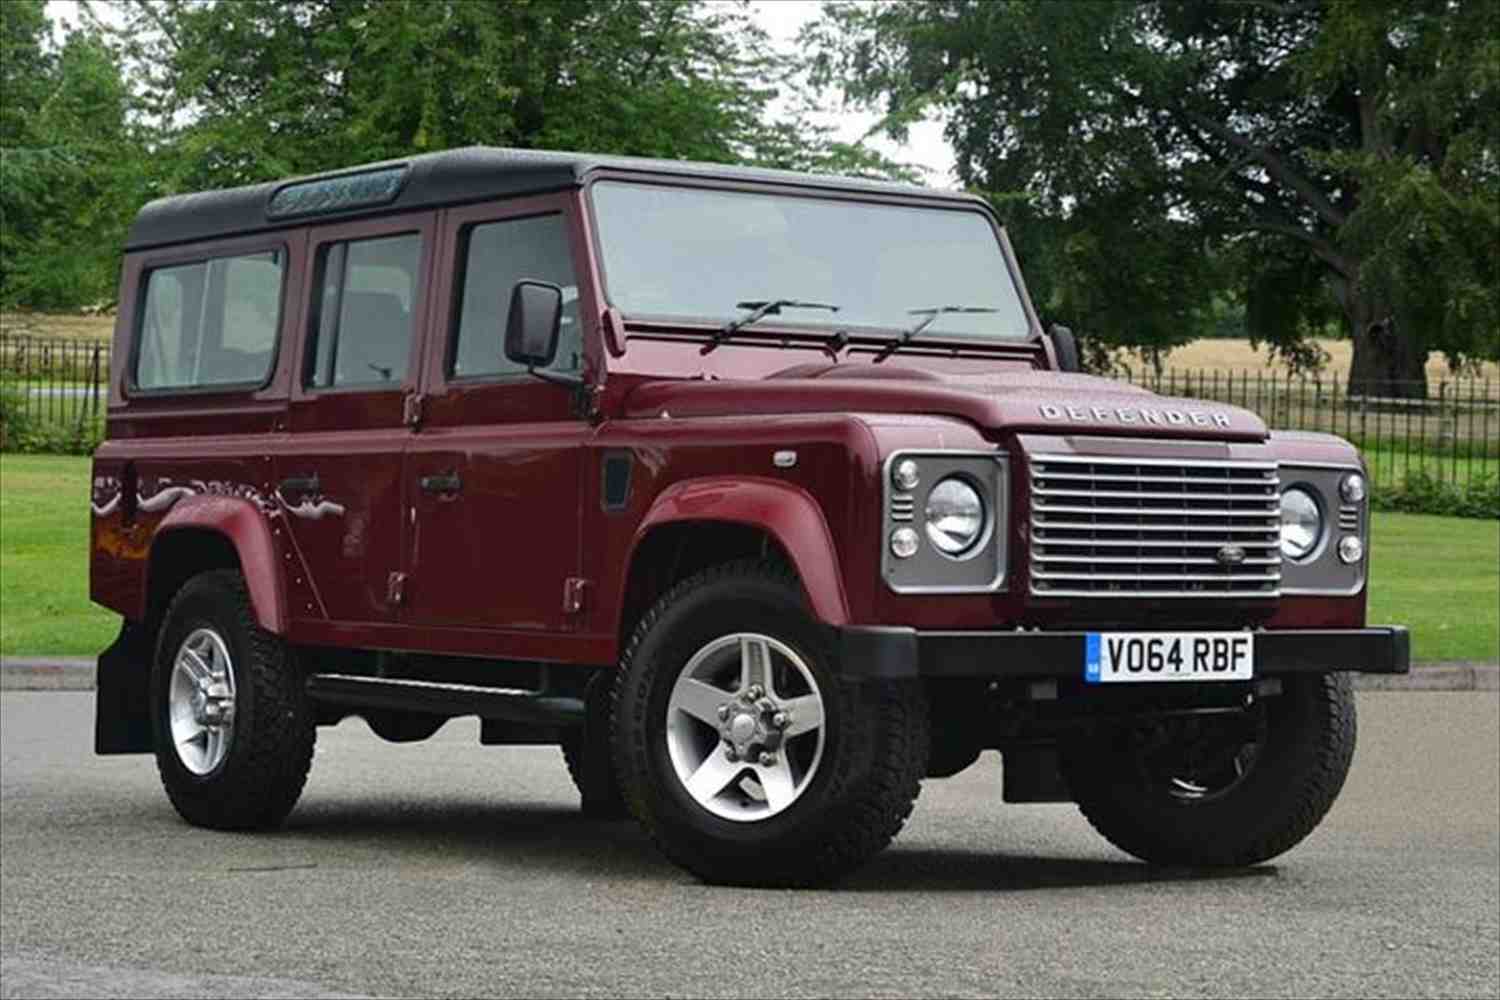 Land-Rover-Defender-110-LWB-Diesel-110-LWB-Diesel-XS-Station-Wagon-TDCi-(2.2)-in-Montalcino-Red-at-Listers-Land-Rover-Hereford